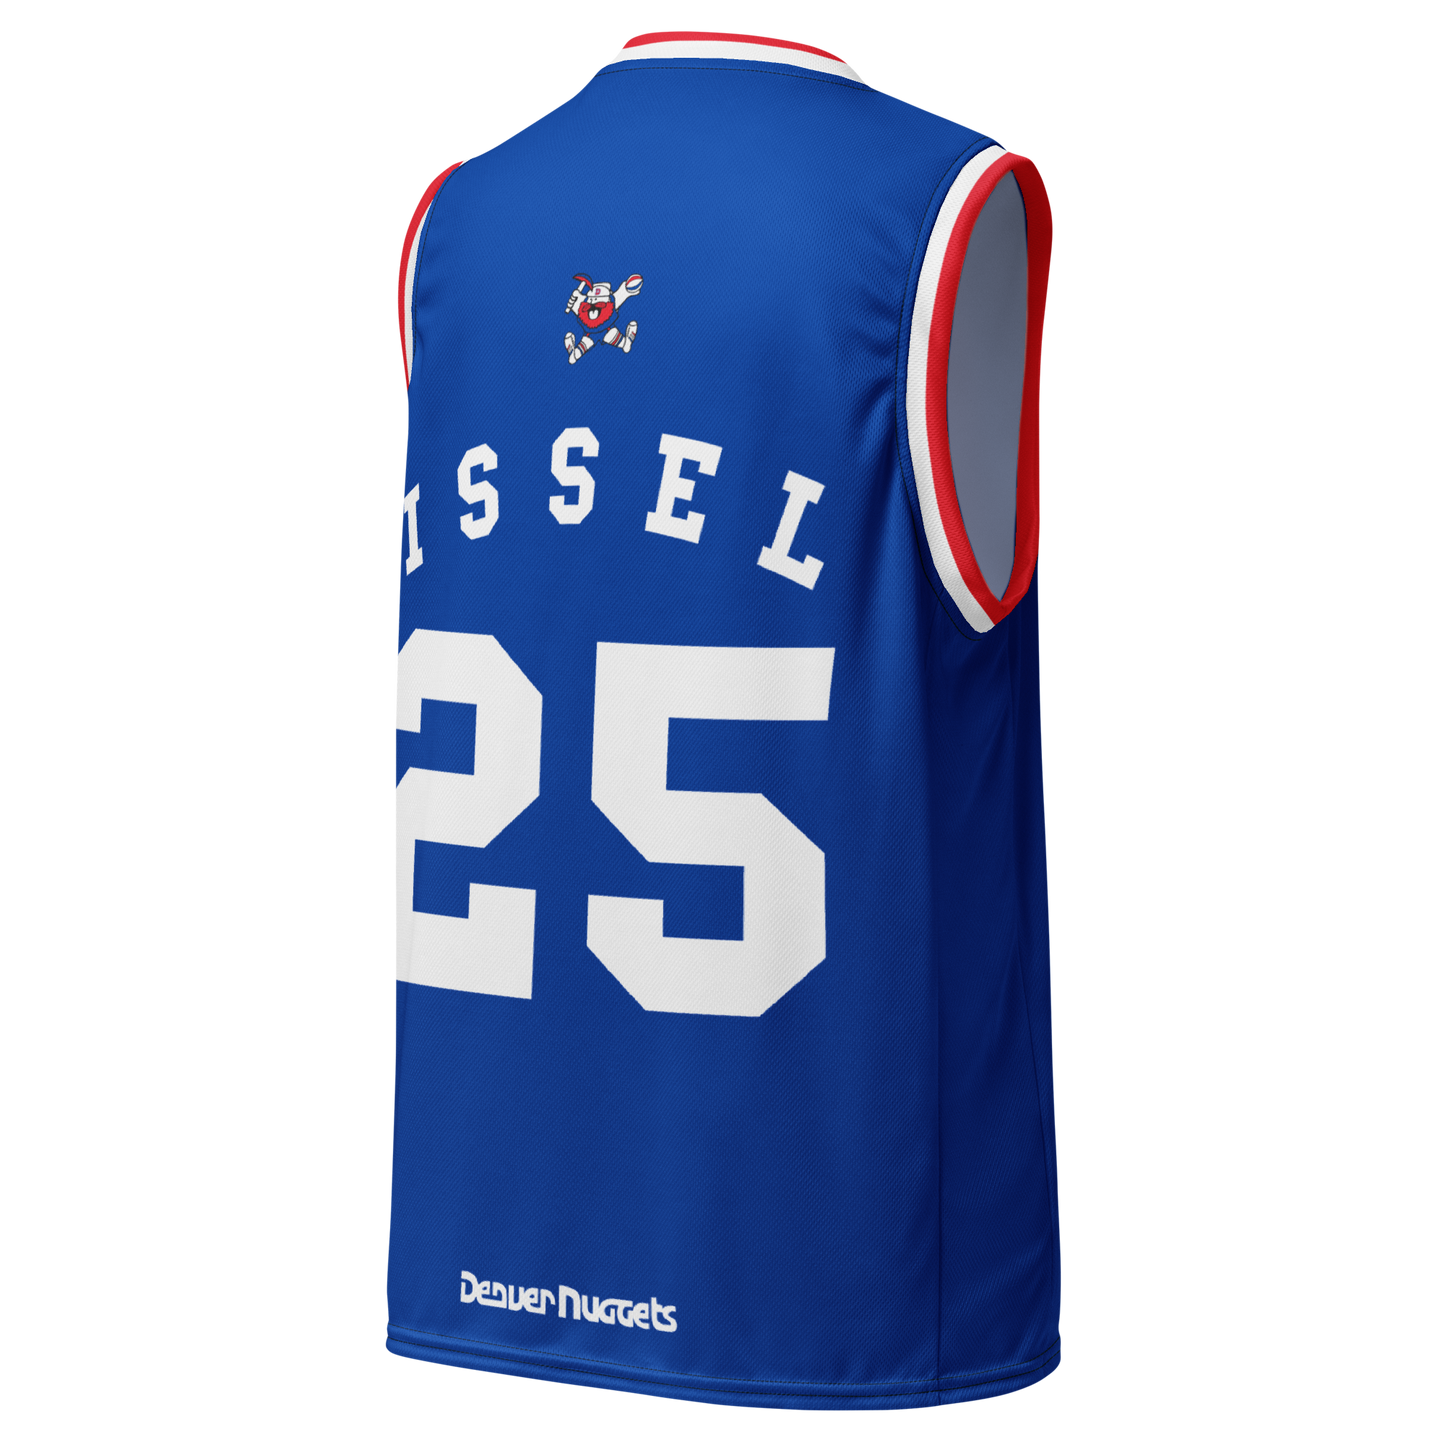 🌟 Step back in time and honor the legendary Dan Issel with the Blue  Nuggets Retro Jersey! 🏀✨ Limited-time offer, so don't miss out!